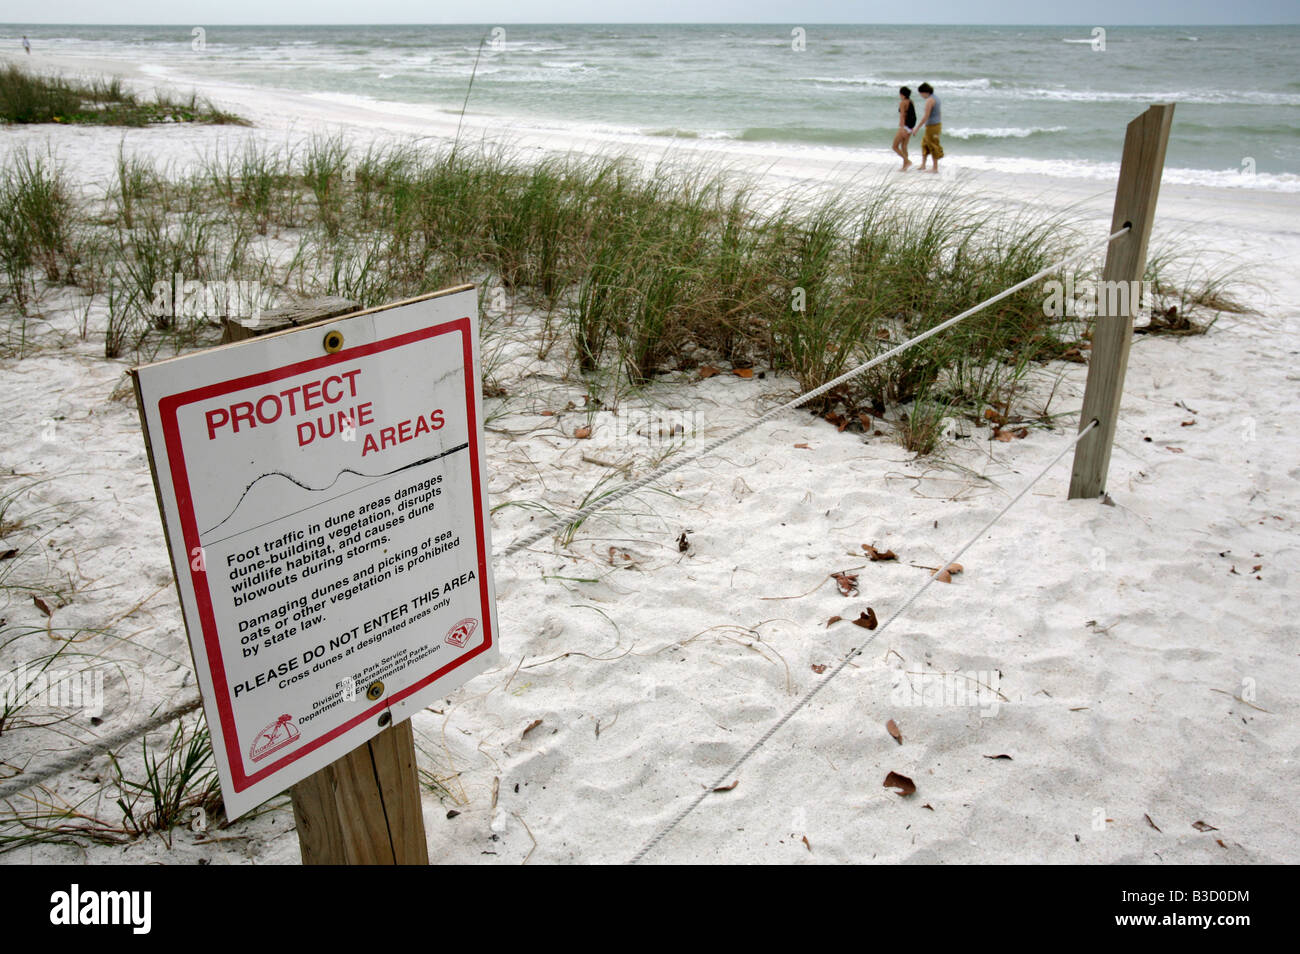 A beach conservation area, Gulf coast of Florida near Fort Myers Stock Photo